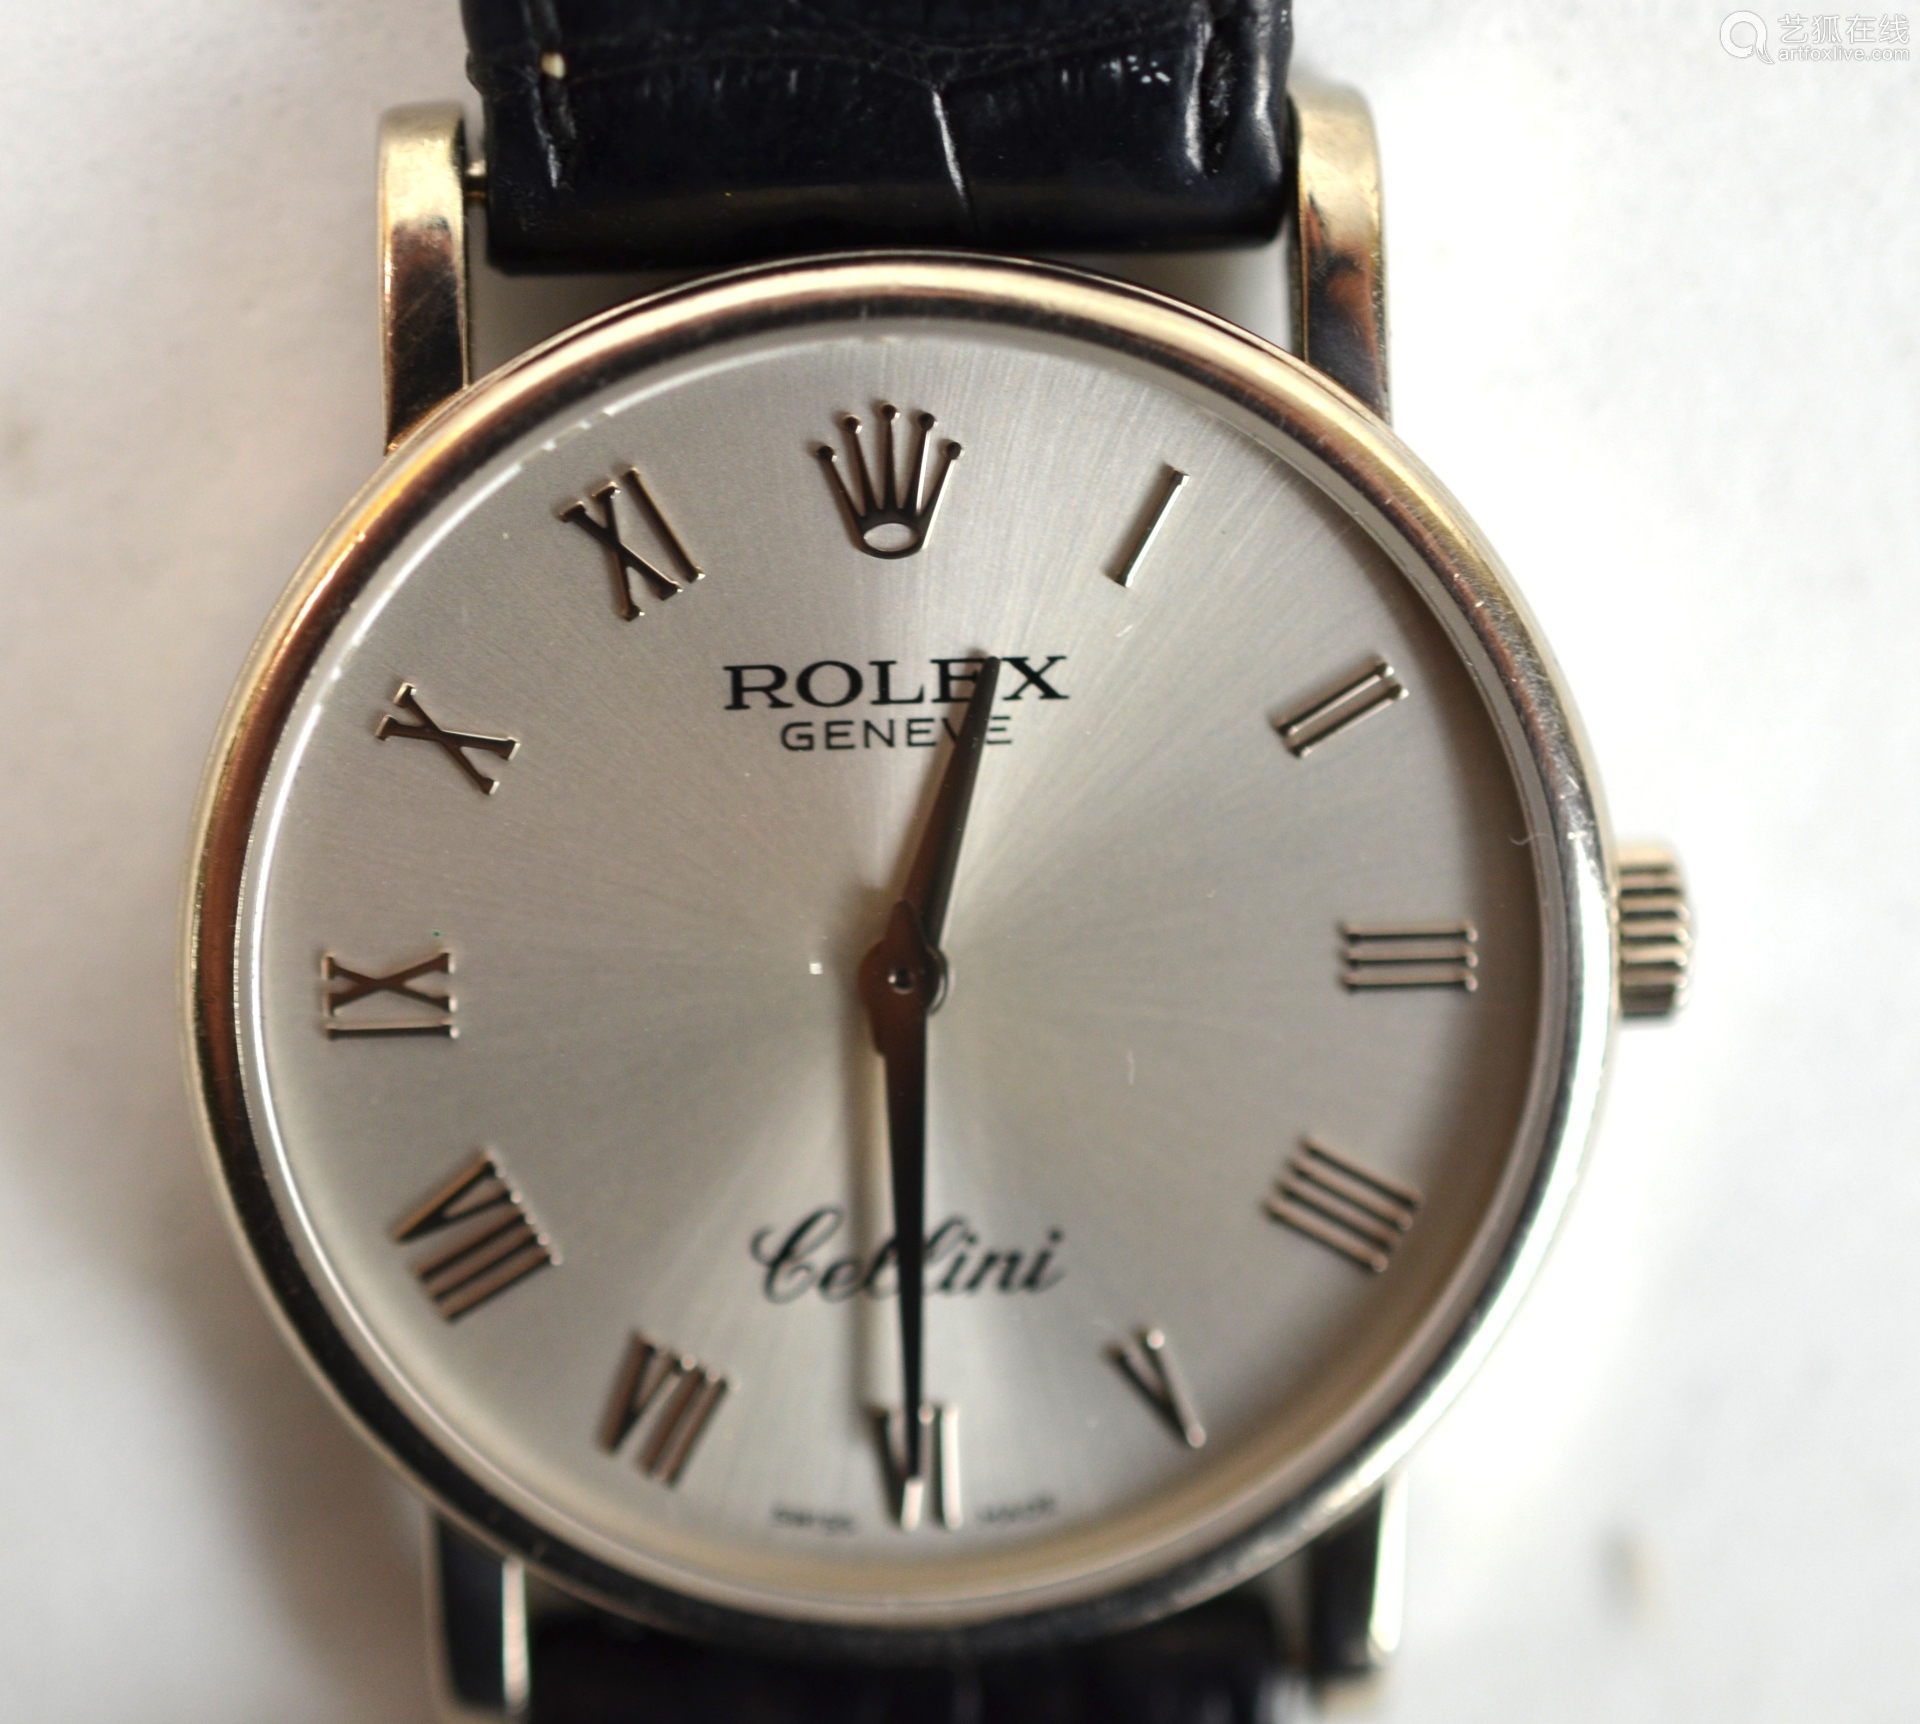 18K Gold Rolex Geneve Cellini  Leather Watch Deal Price 